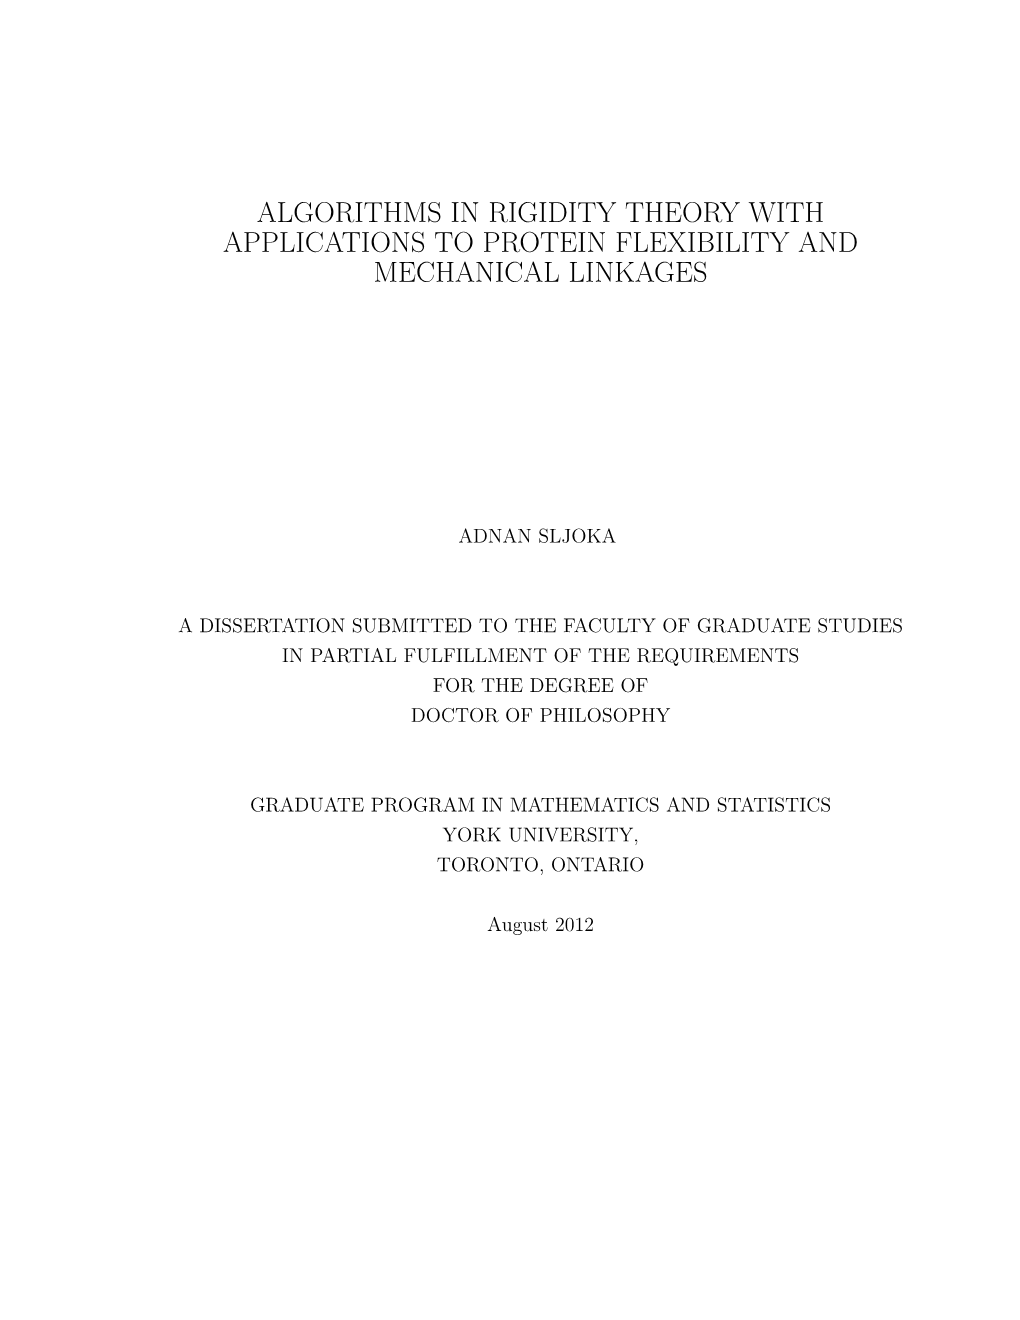 Algorithms in Rigidity Theory with Applications to Protein Flexibility and Mechanical Linkages